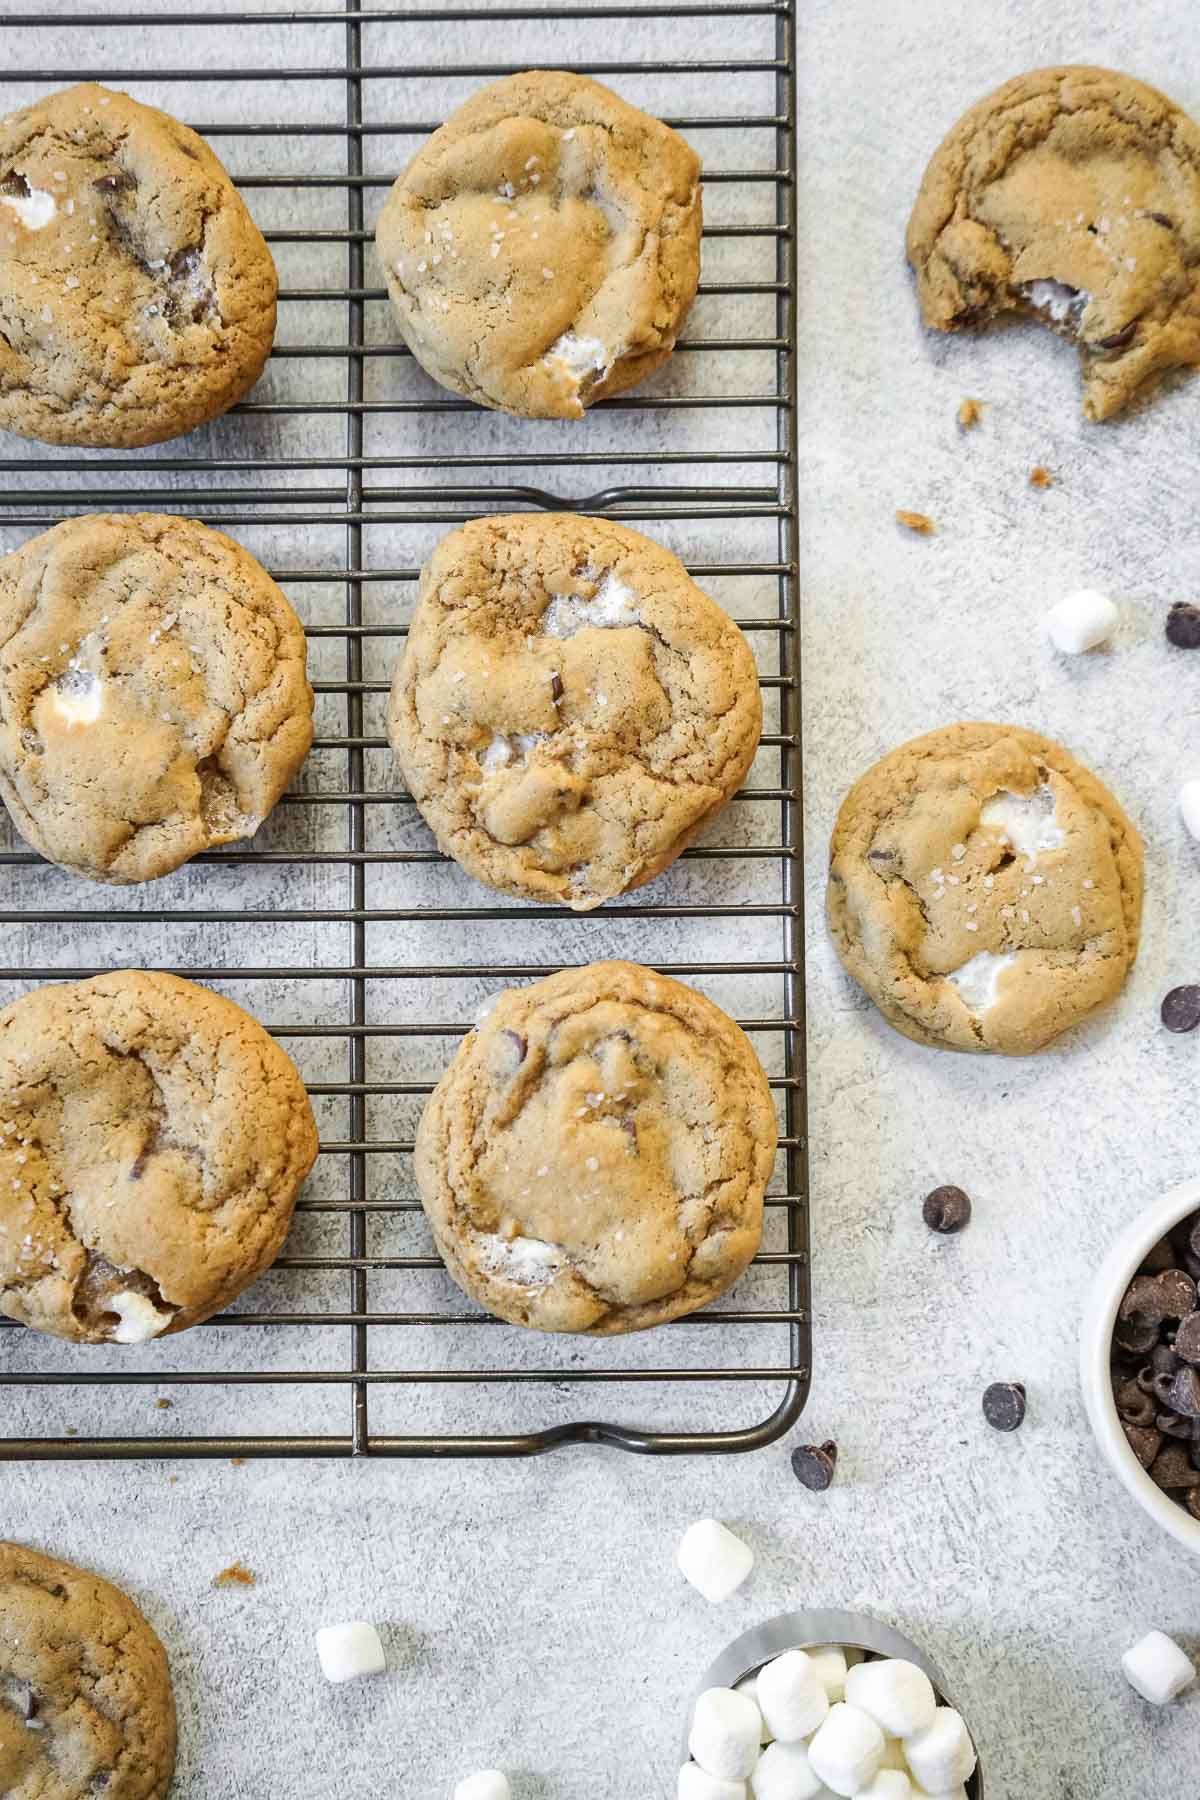 Several chocolate chip marshmallow cookies on a cooling rack.